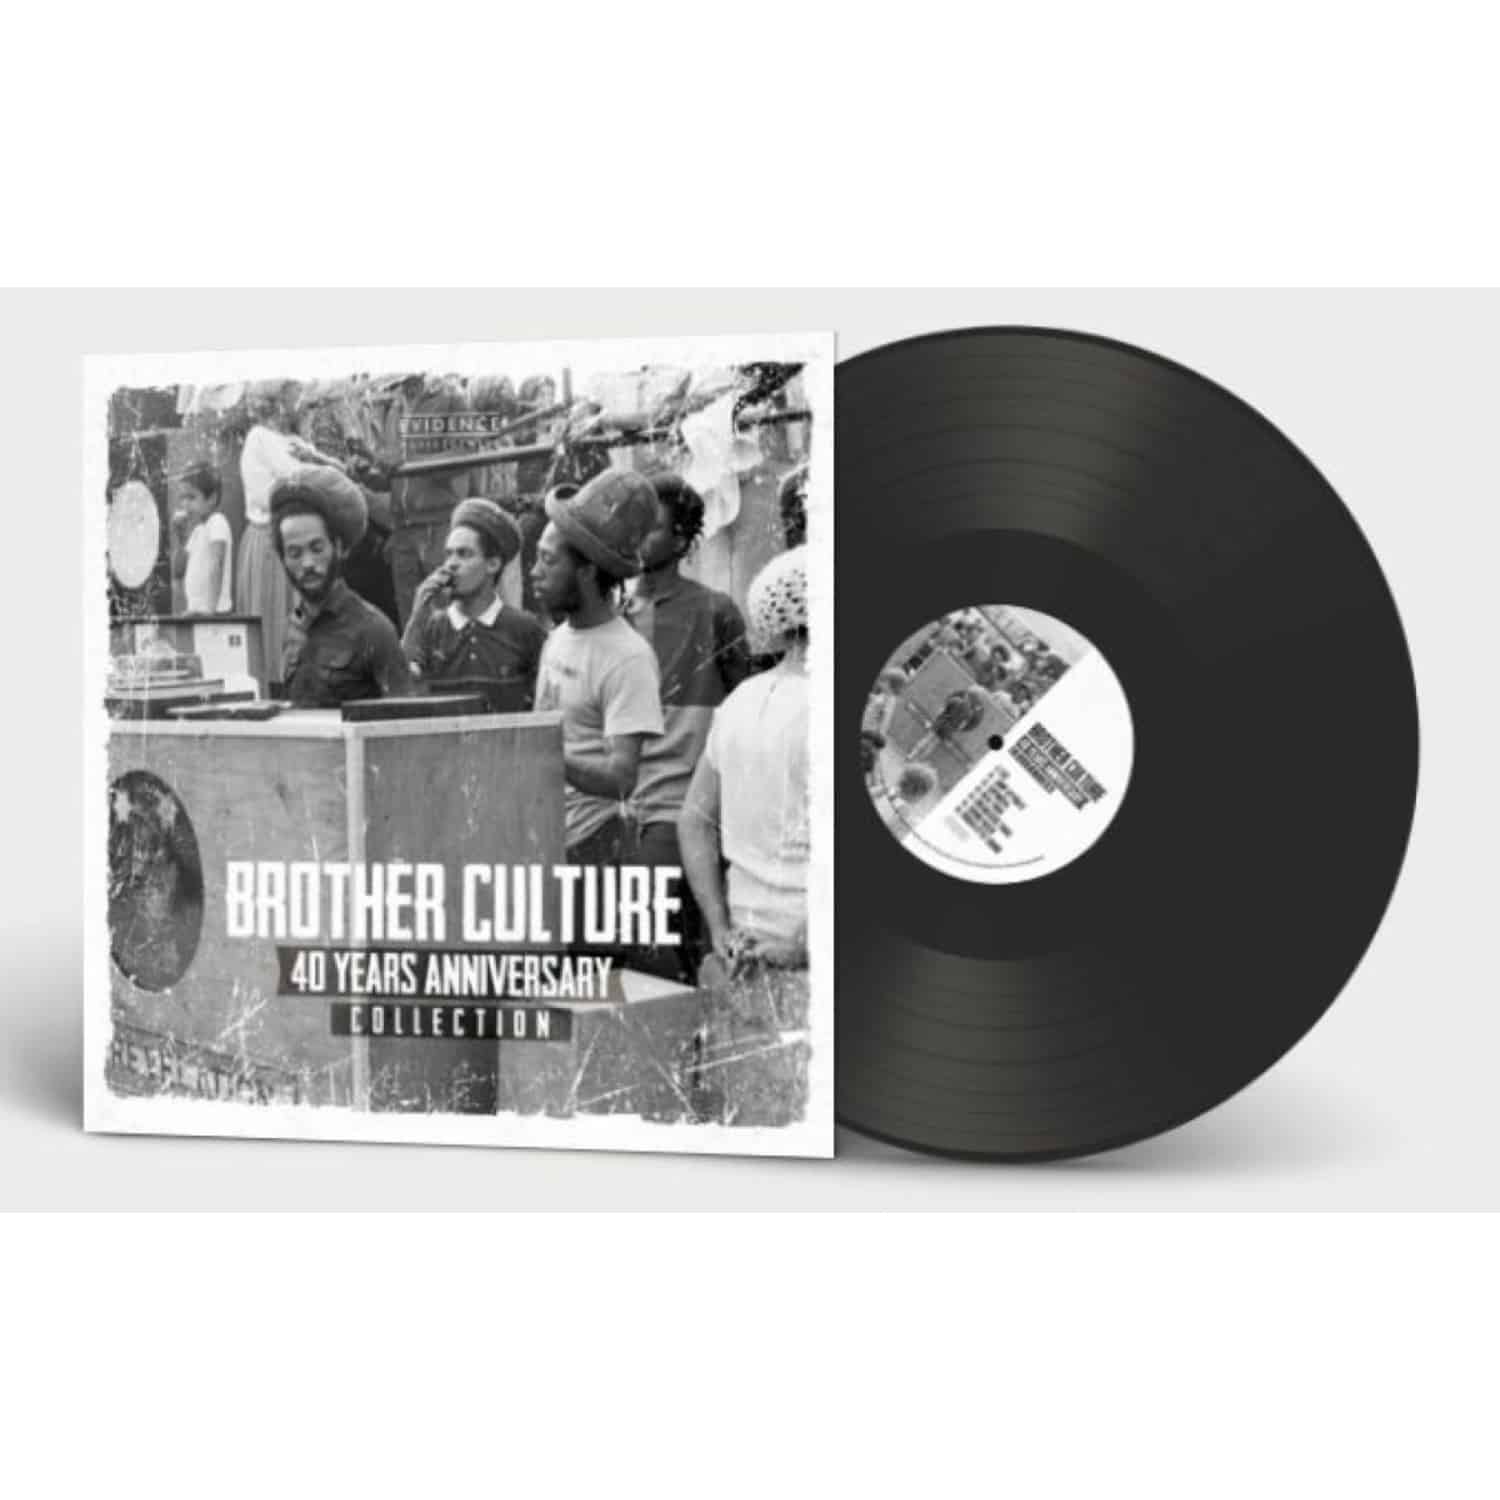 Brother Culture - 40 YEARS ANNIVERSARY COLLECTION 